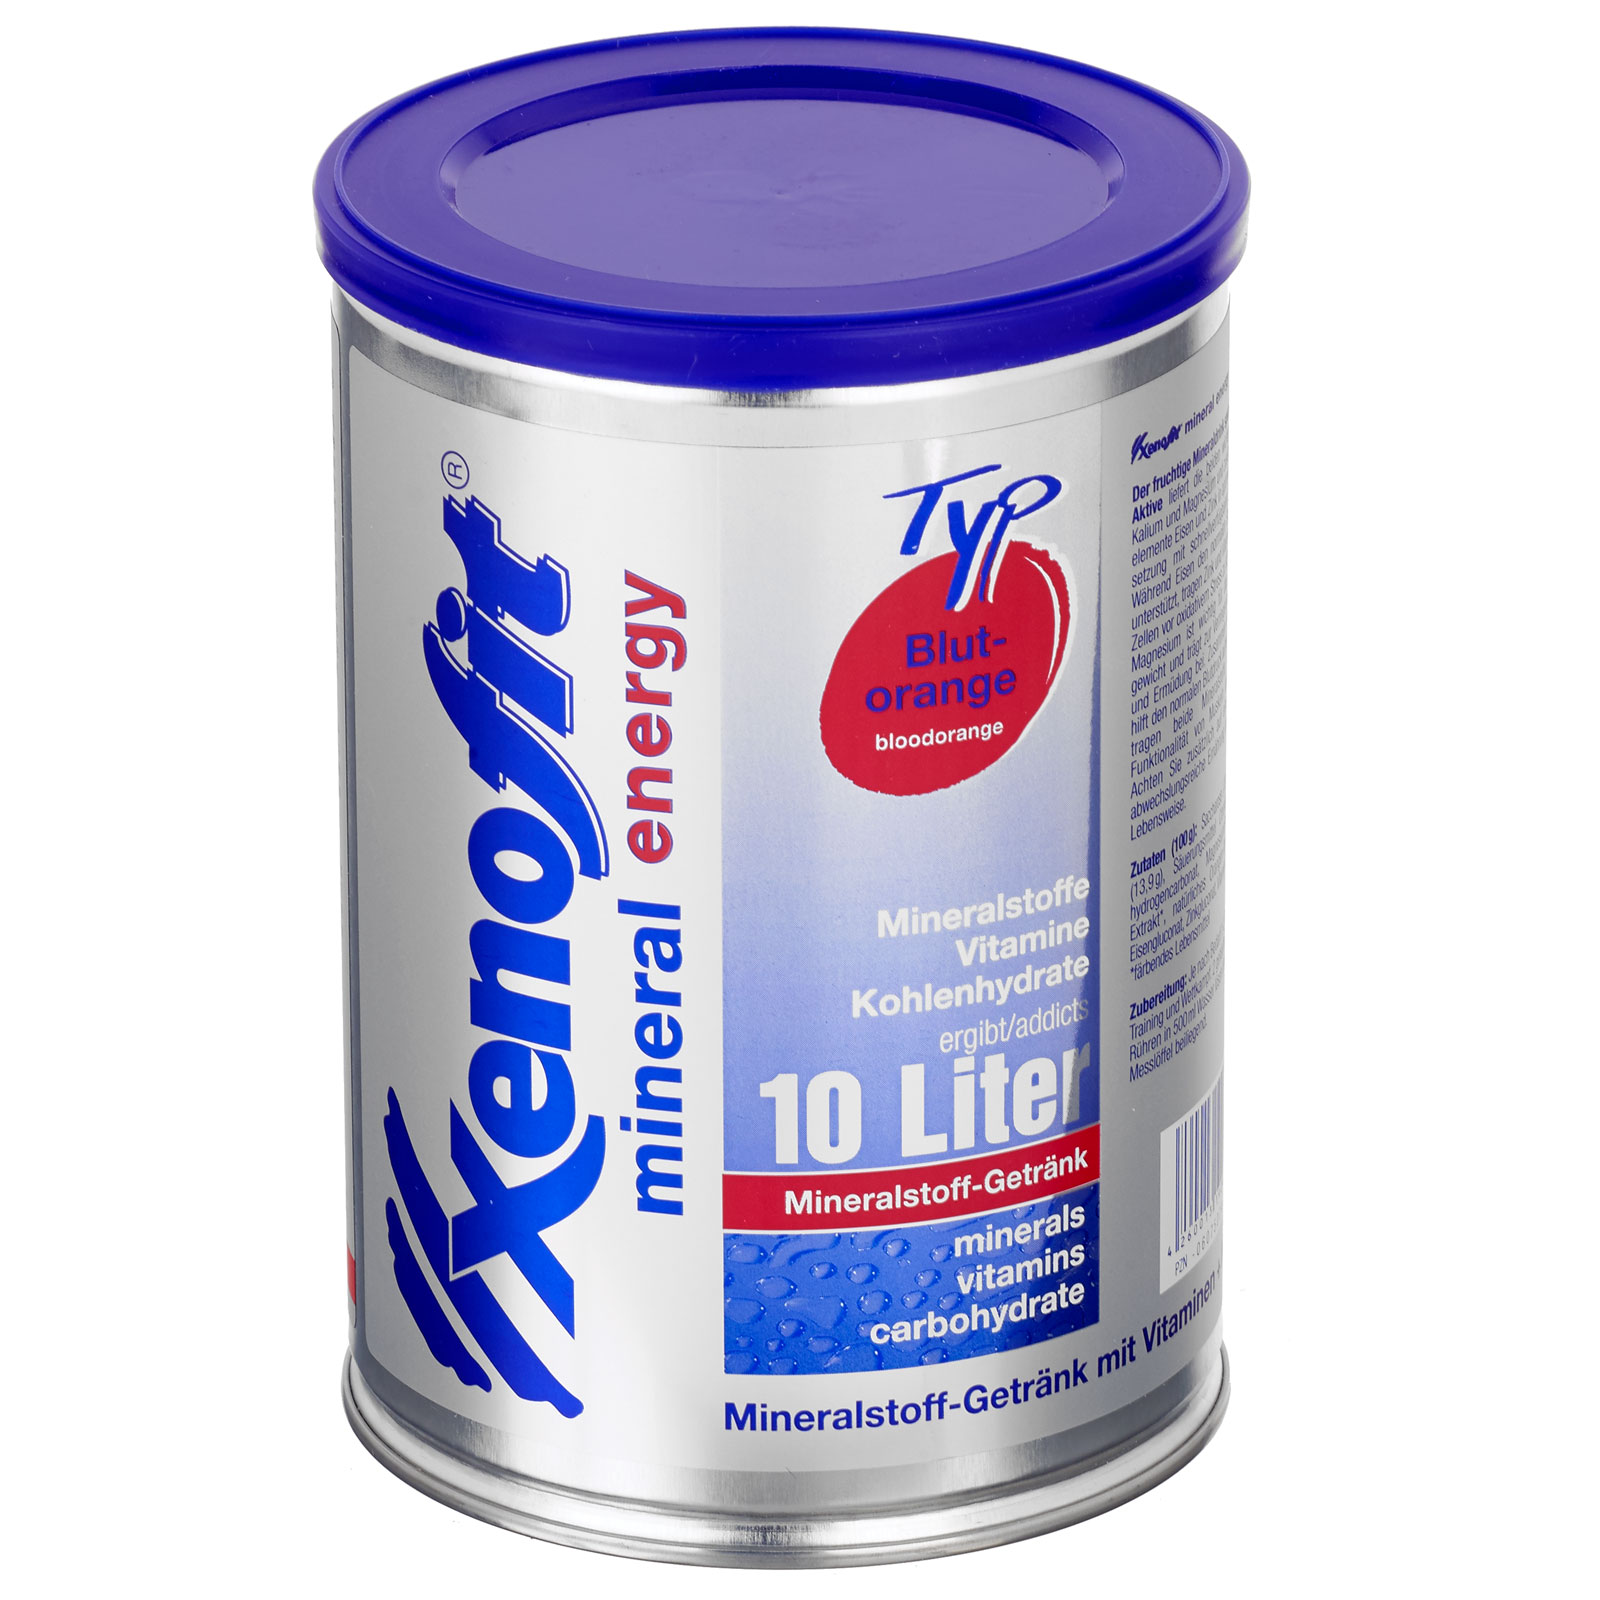 Picture of Xenofit Mineral Energy Drink with Carbohydrates - 720g